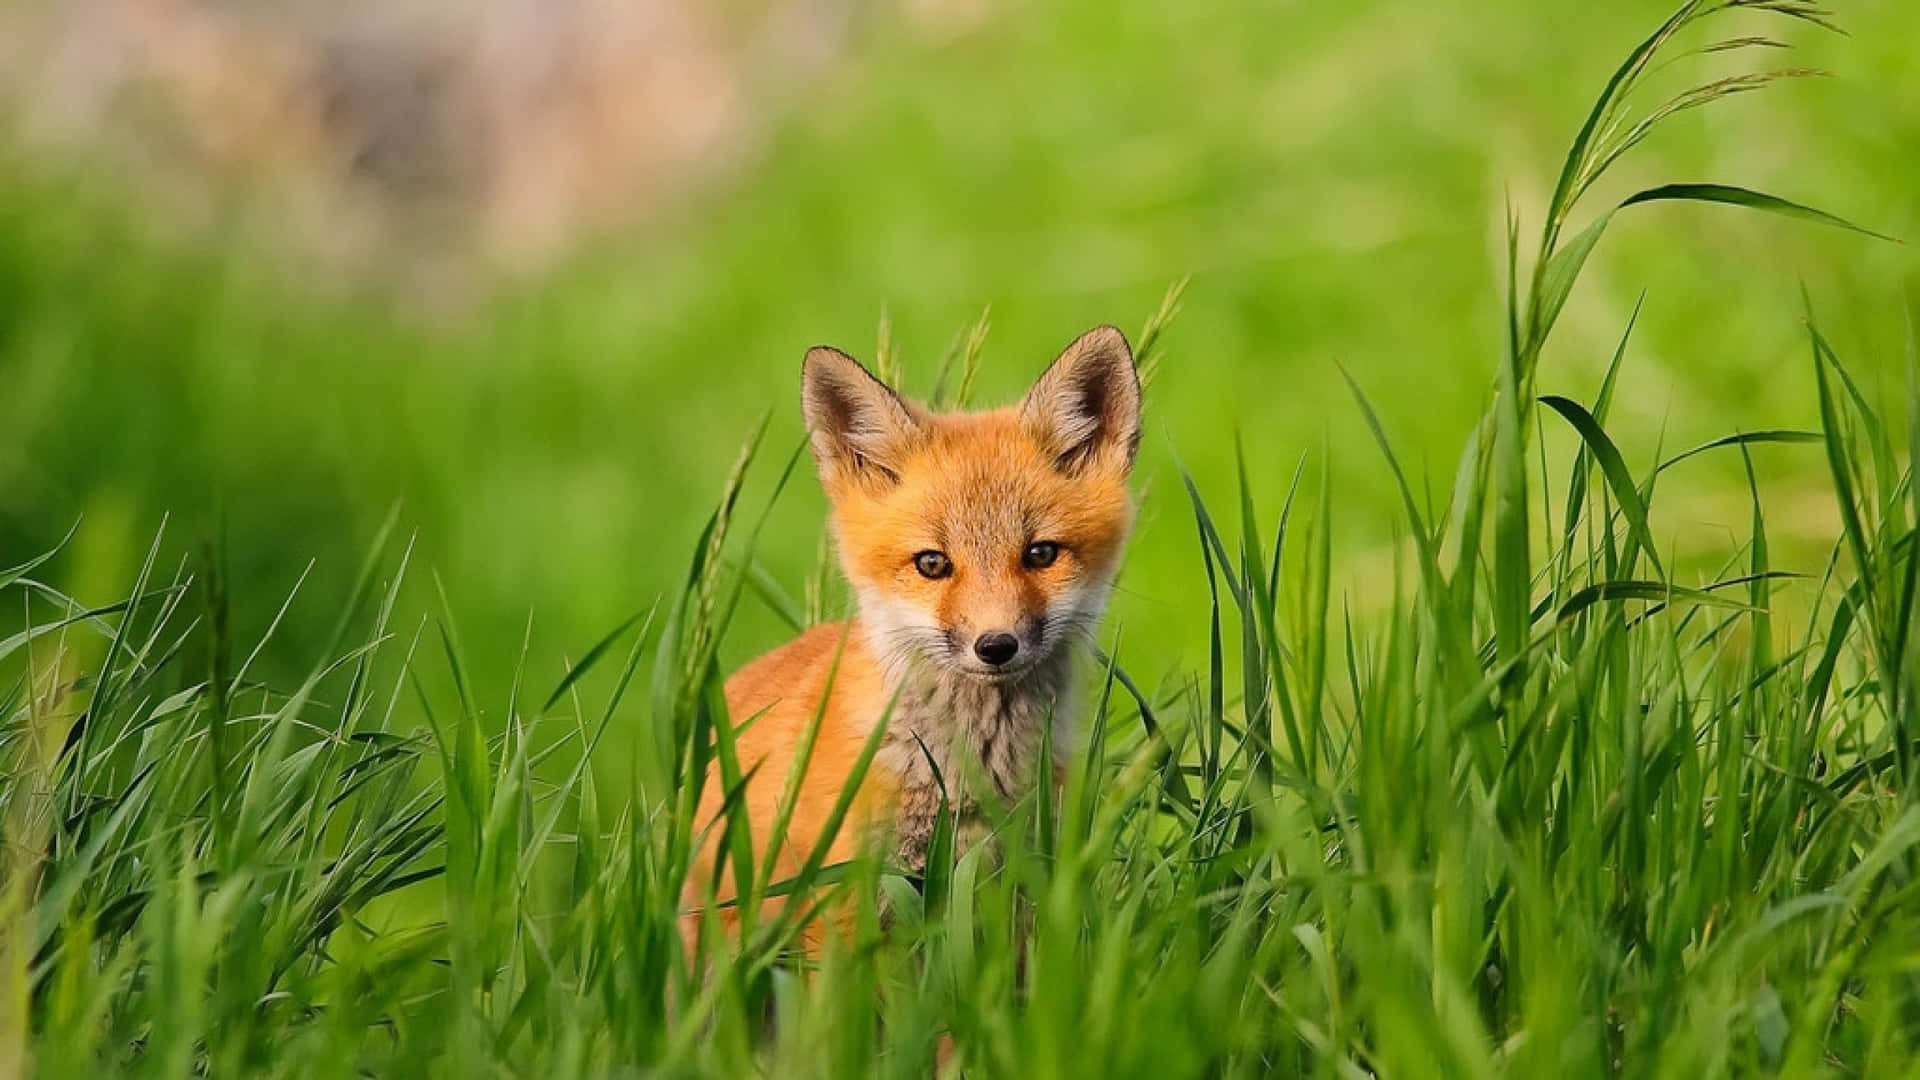 Cute Animal Baby Fox Picture